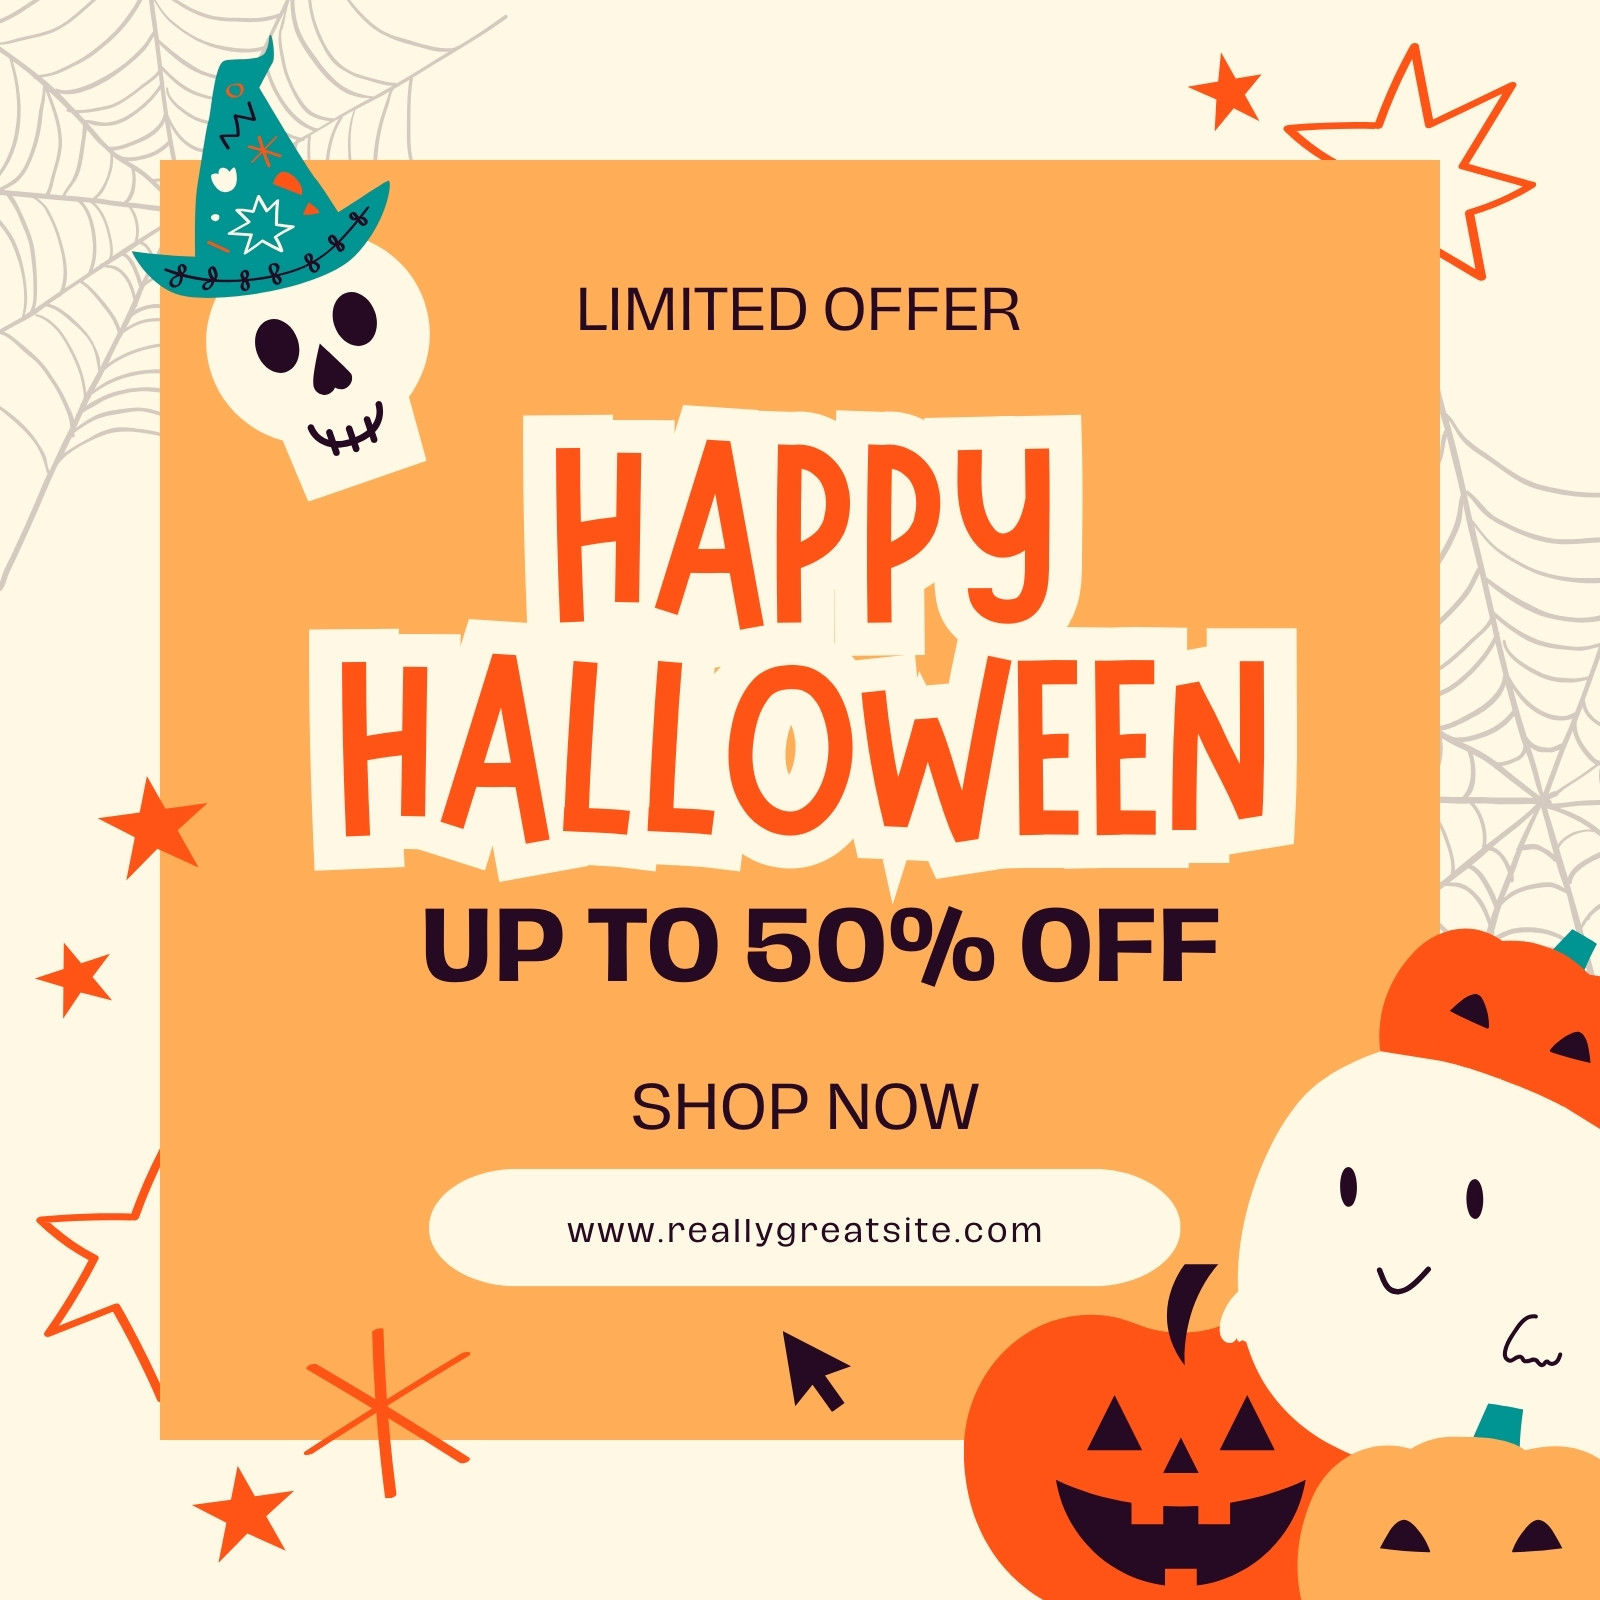 Page 6 - Free customizable Halloween Instagram post templates